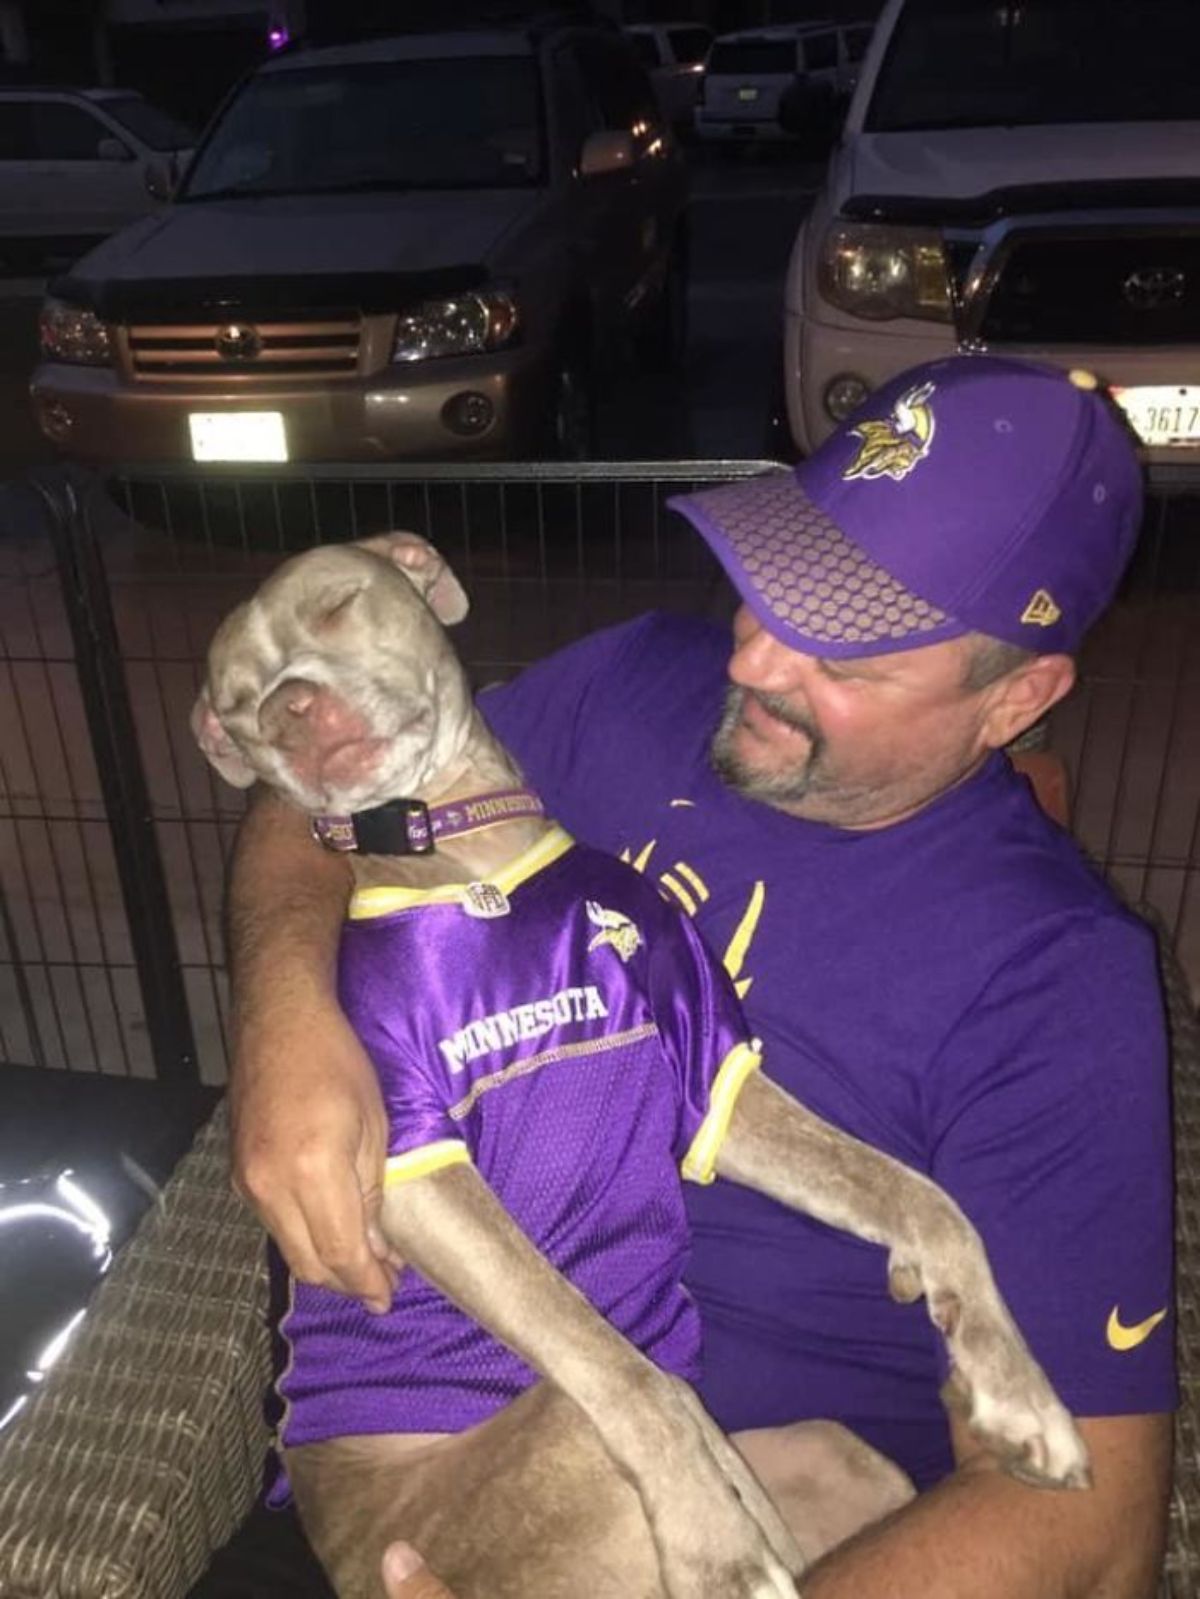 grey and white pitbull sleeping in a man's arms and both are wearing matching purple and yellow shirts